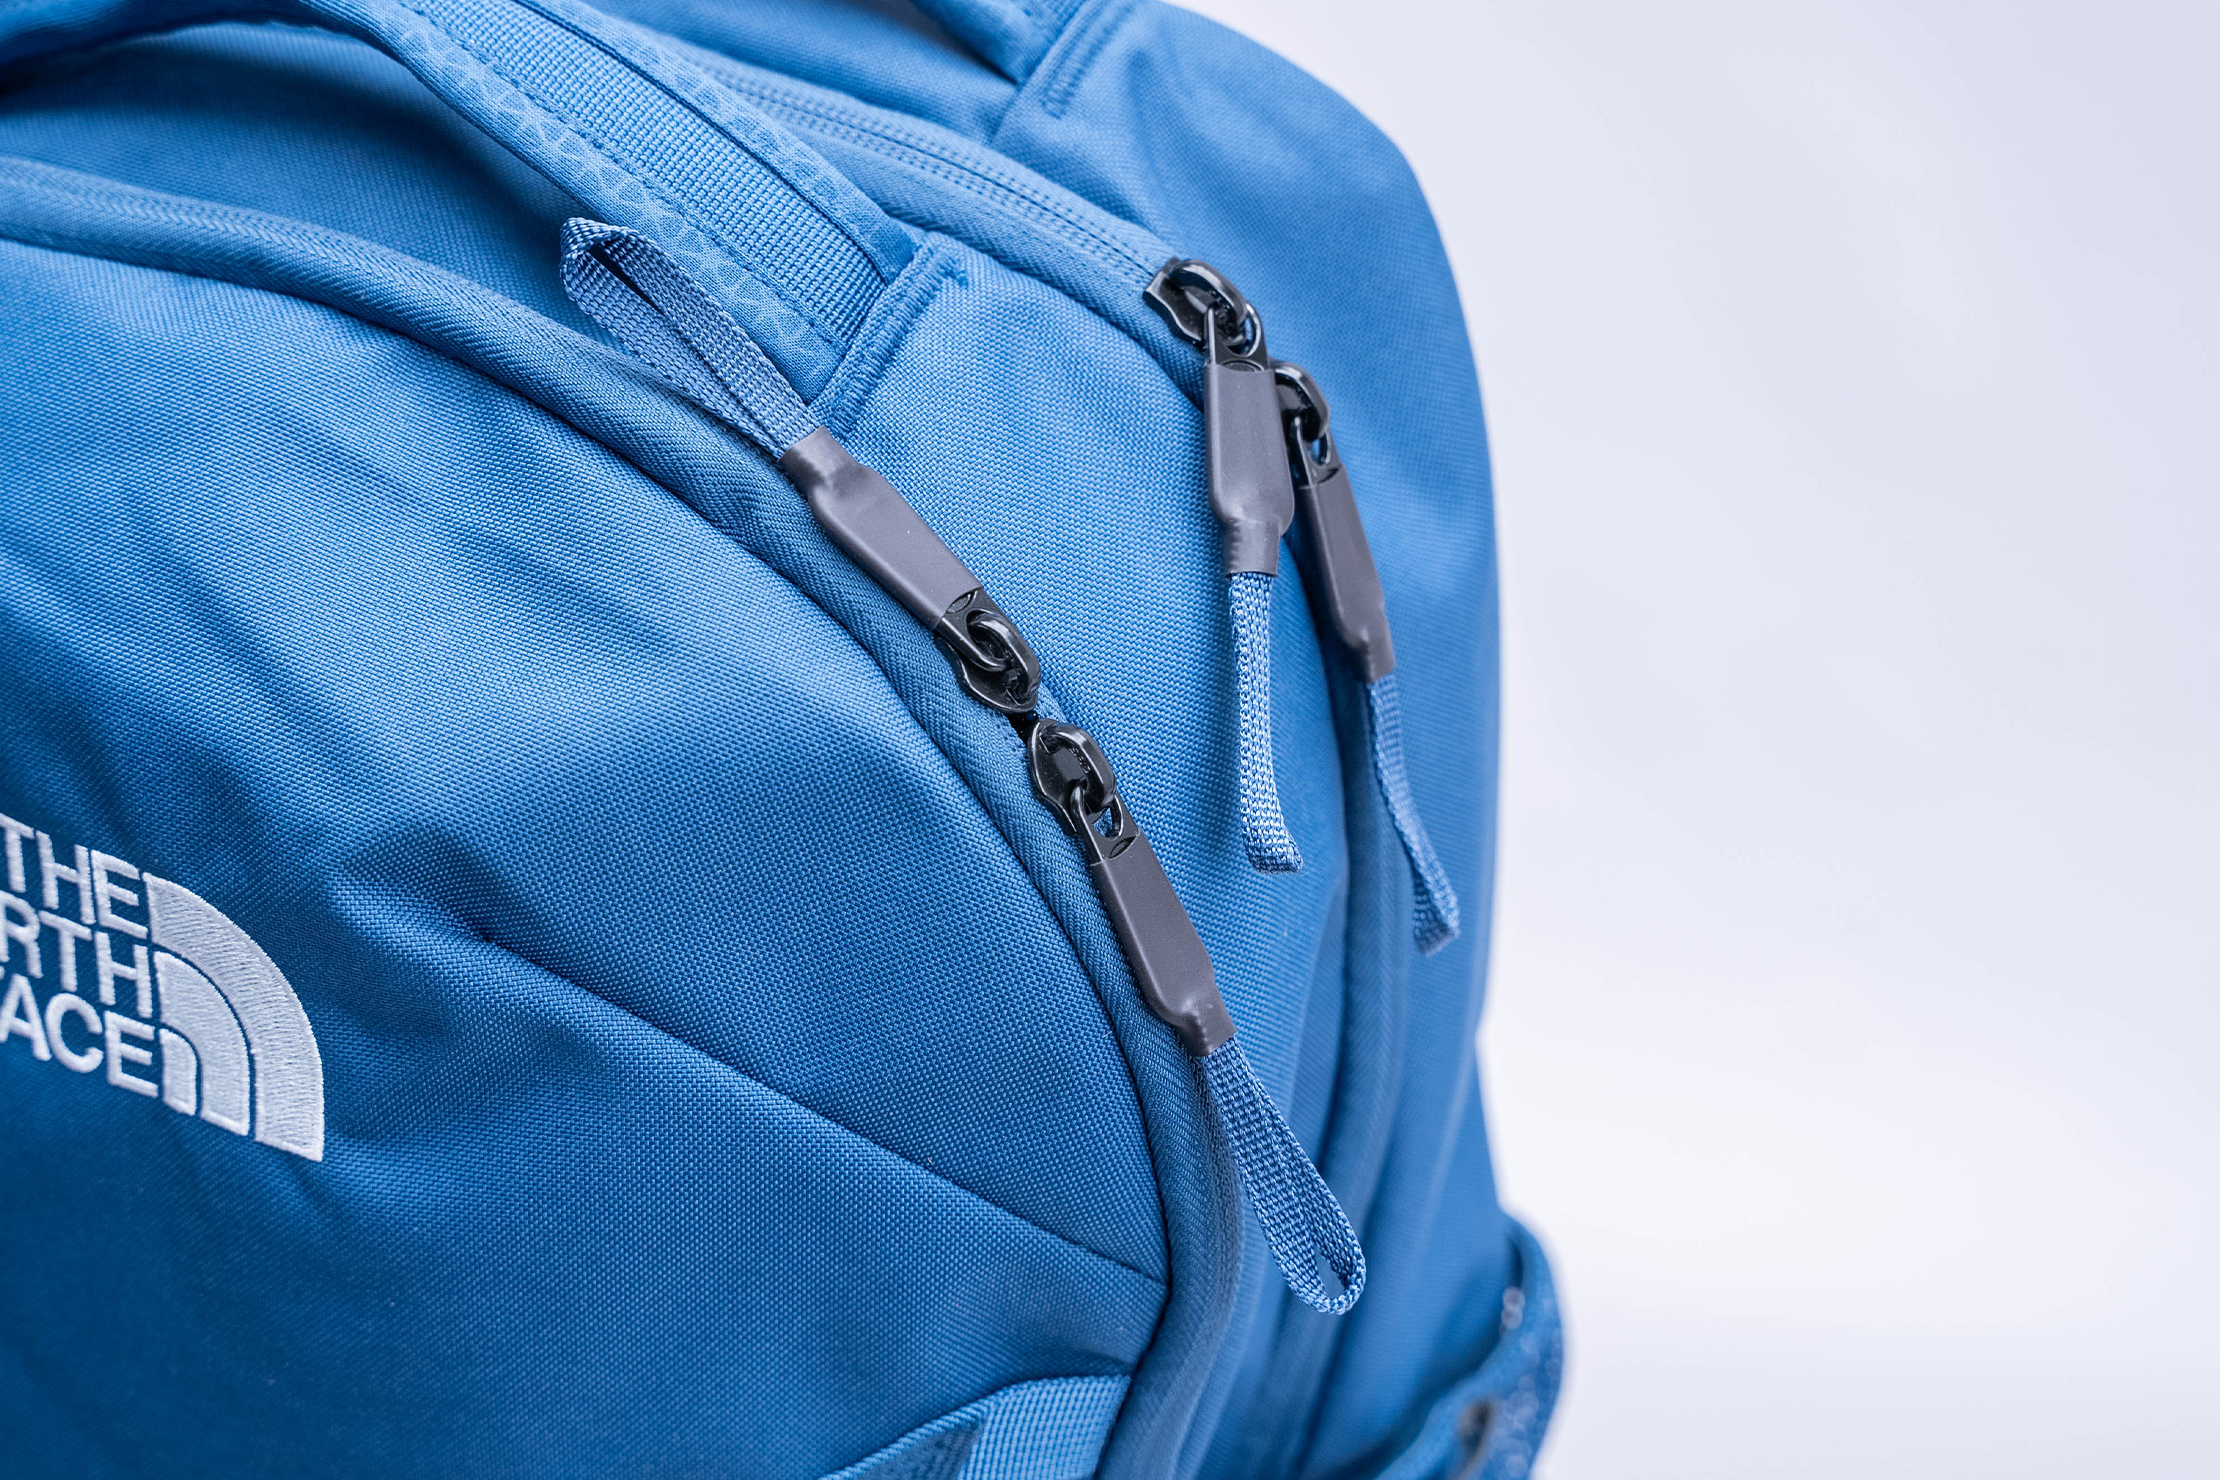 The North Face Vault Backpack Zipper